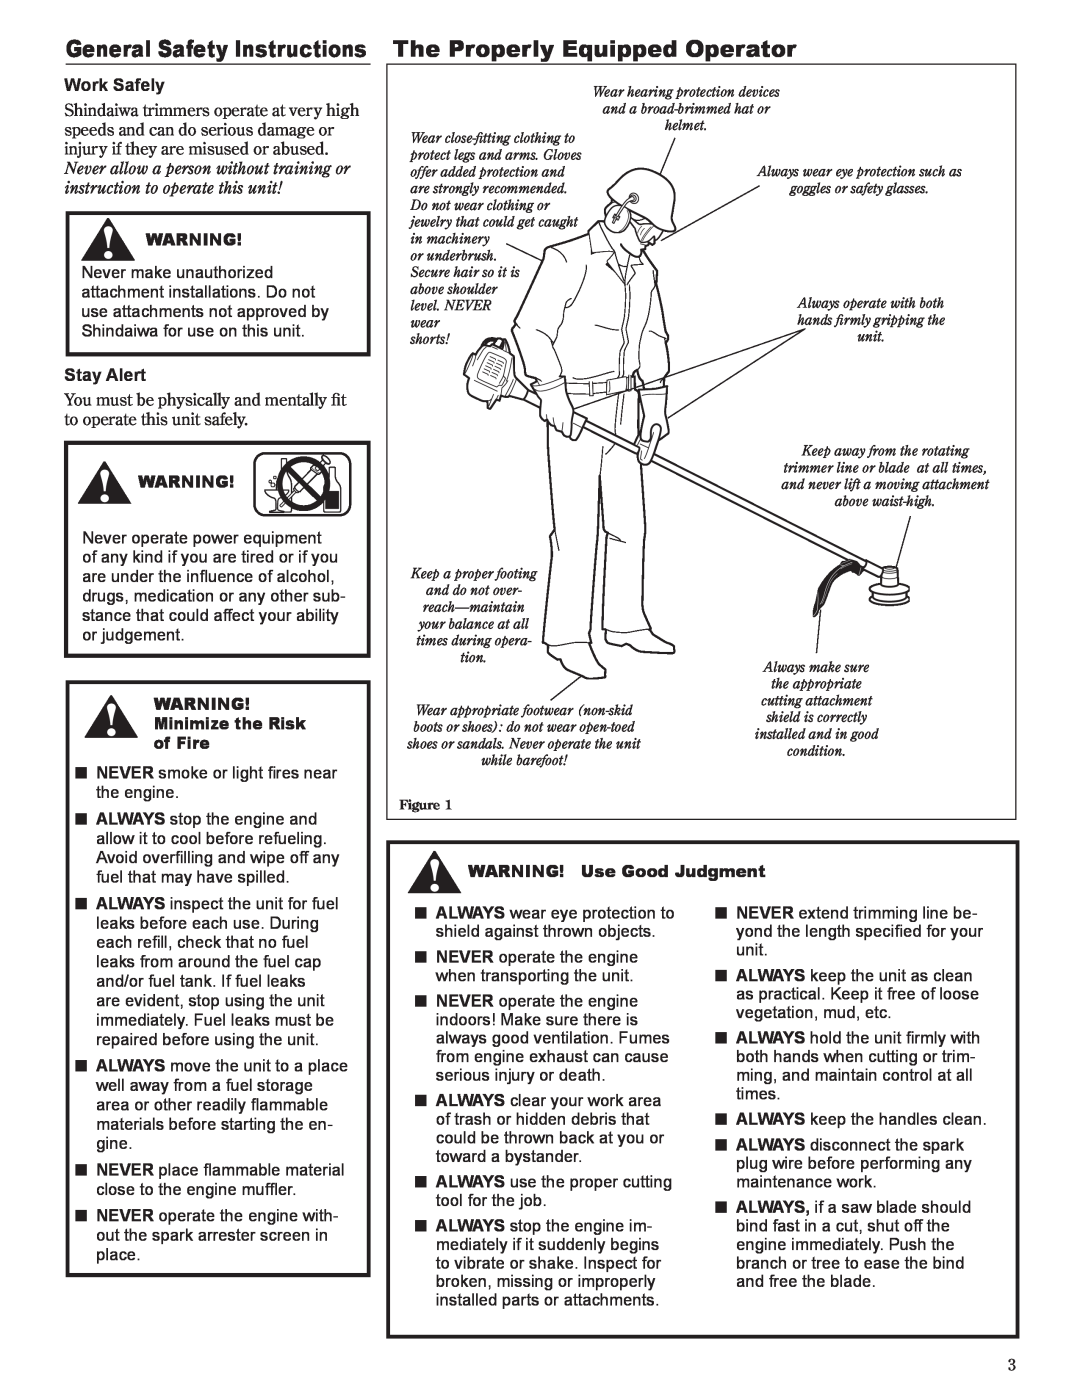 Shindaiwa 81642 manual General Safety Instructions The Properly Equipped Operator, Work Safely, Stay Alert 